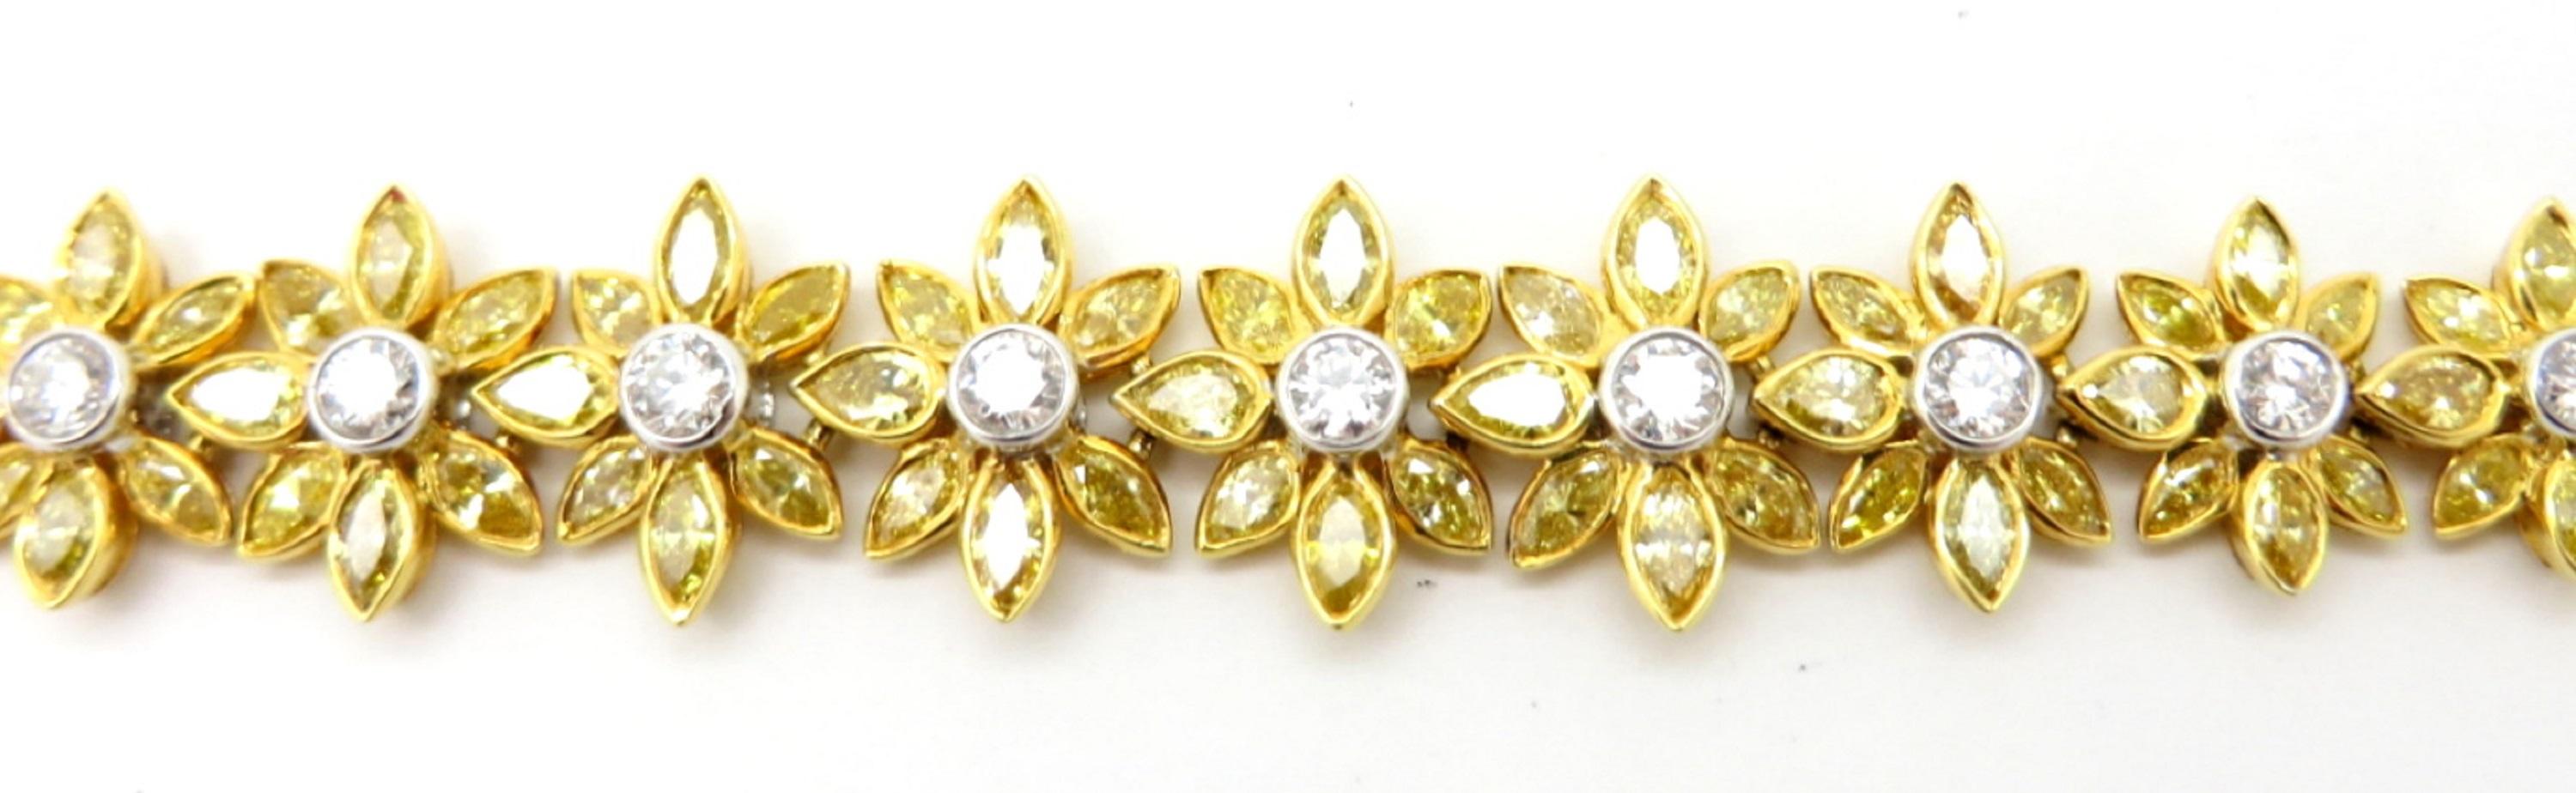 For sale is a gorgeous white and yellow diamond flower link tennis bracelet!
Crafted out of solid 18K White and Yellow Gold with a high polish finish.
Showcasing 140 Fancy Vivid Yellow Marquise Brilliant Cut diamonds, each bezel set in yellow gold